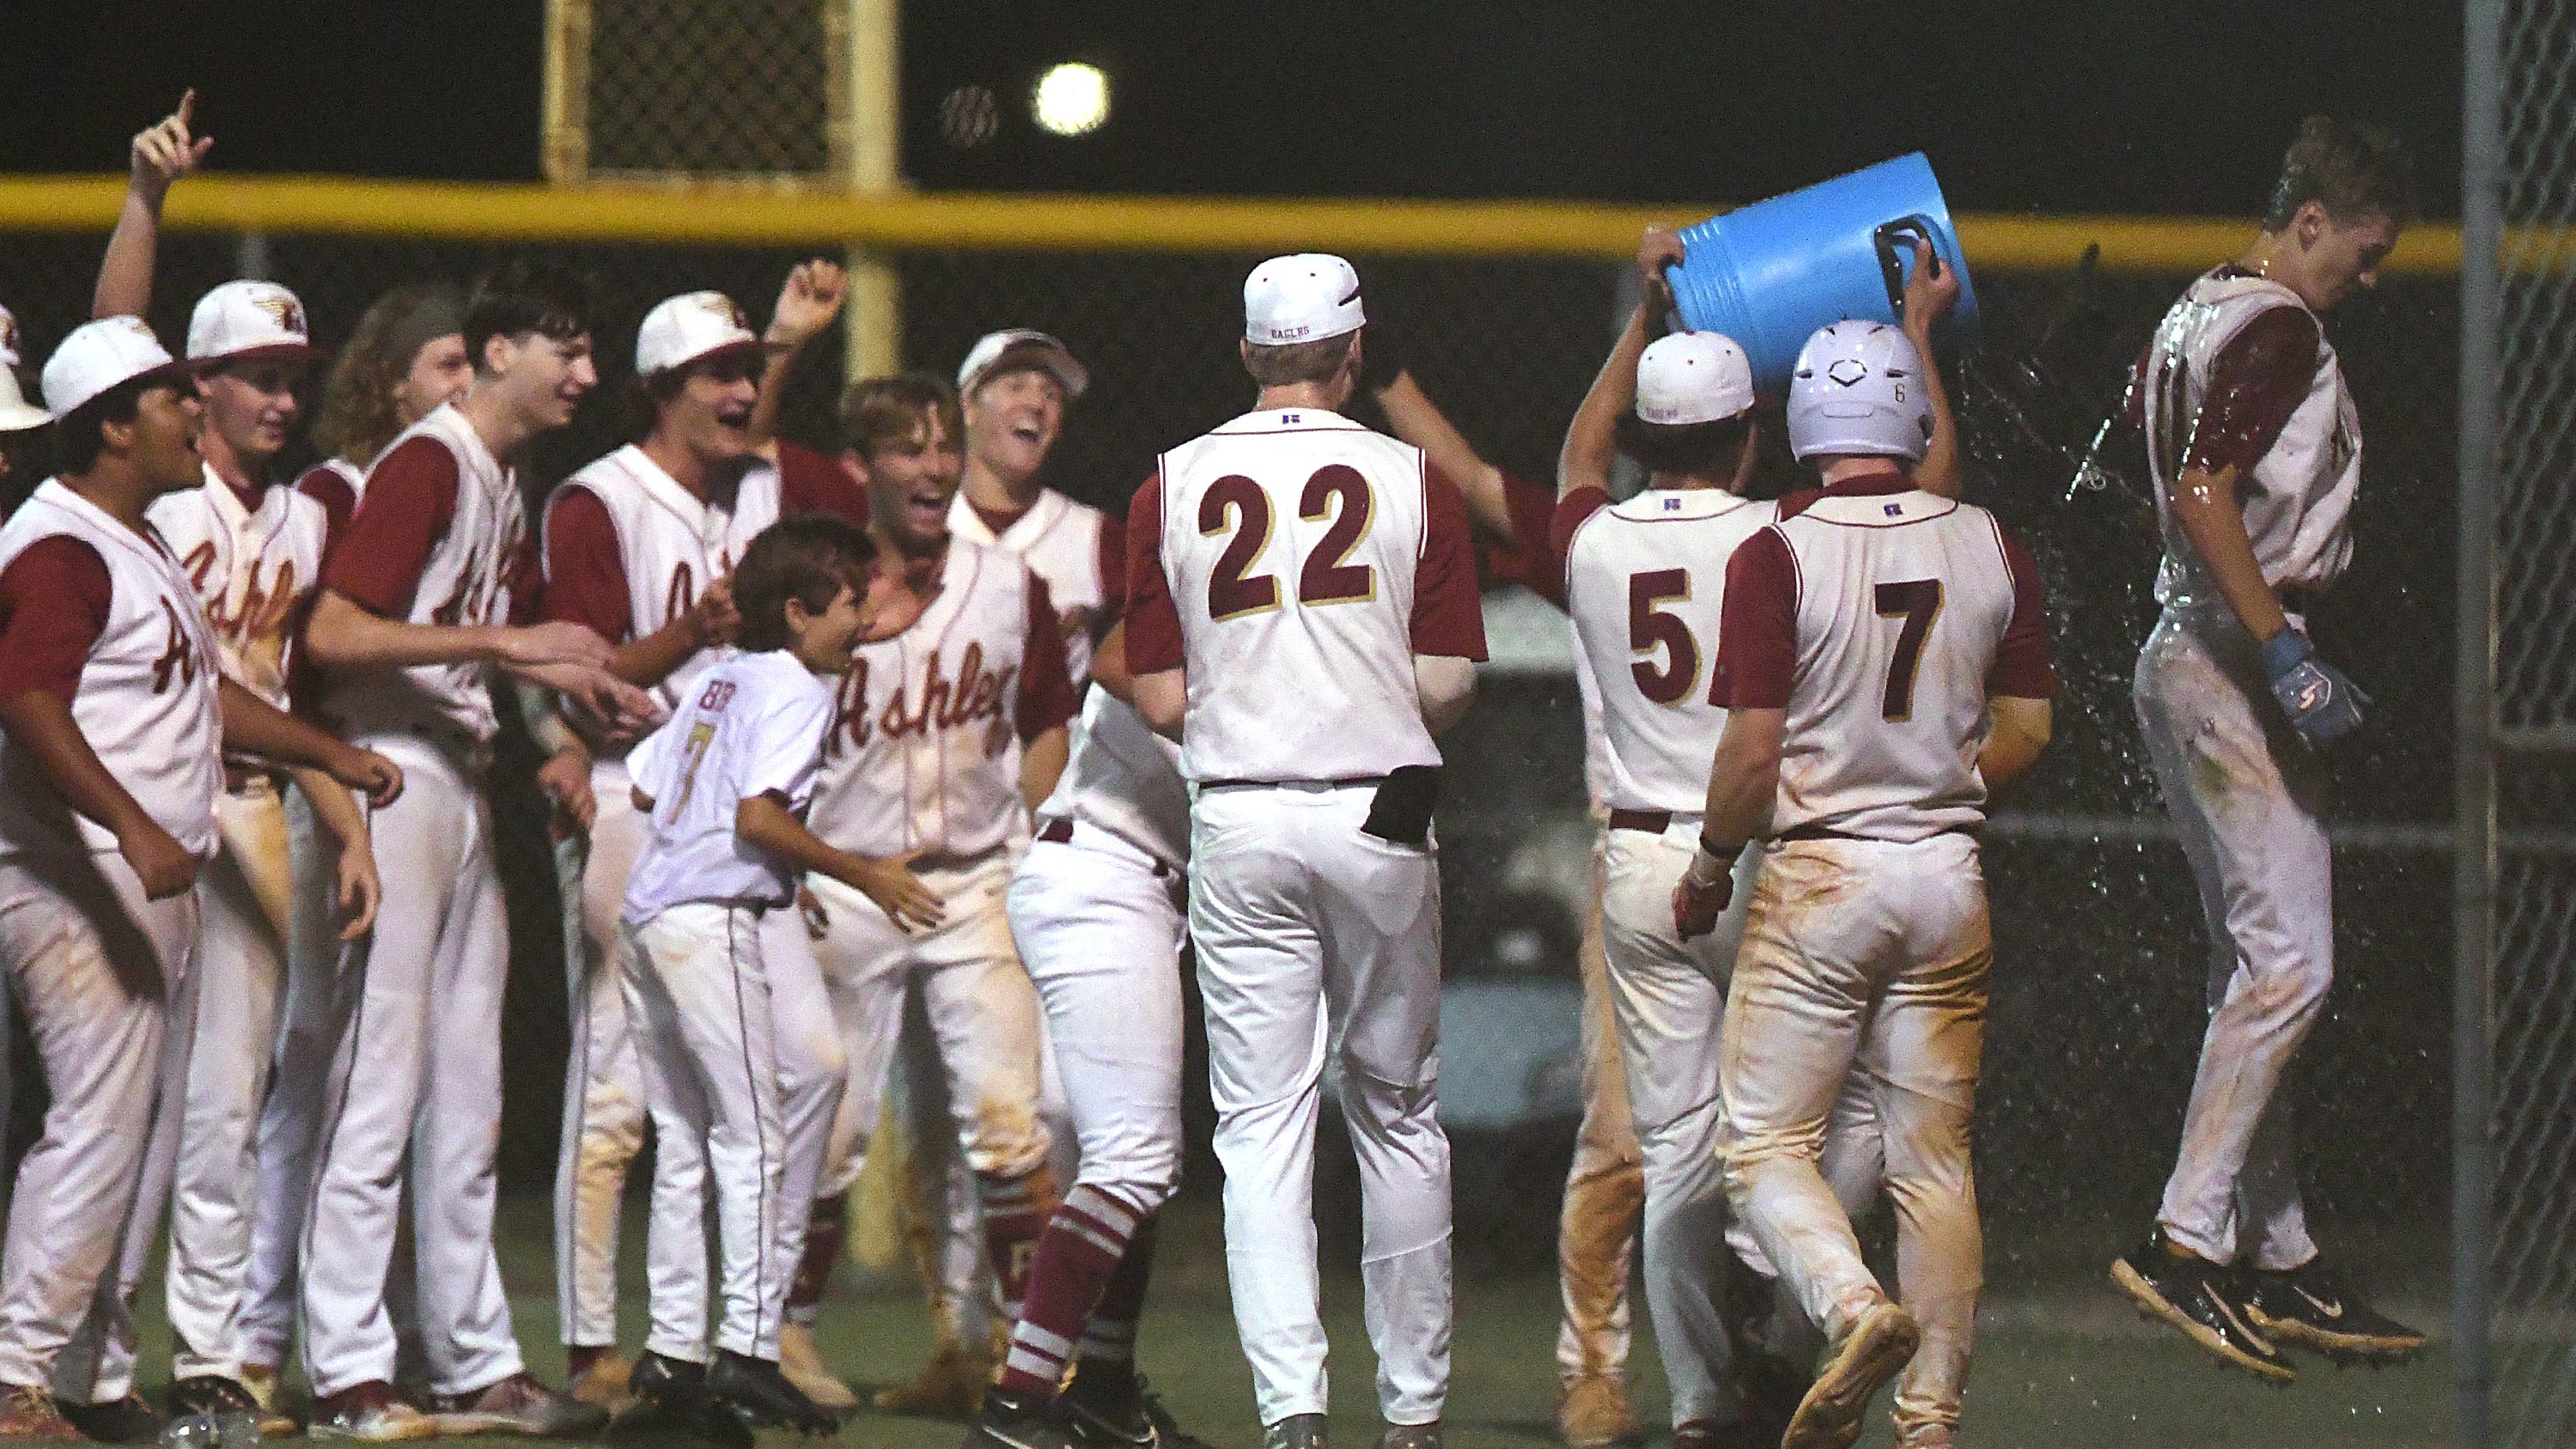 'It's amazing': Ashley baseball secures first state championship berth in 17 years